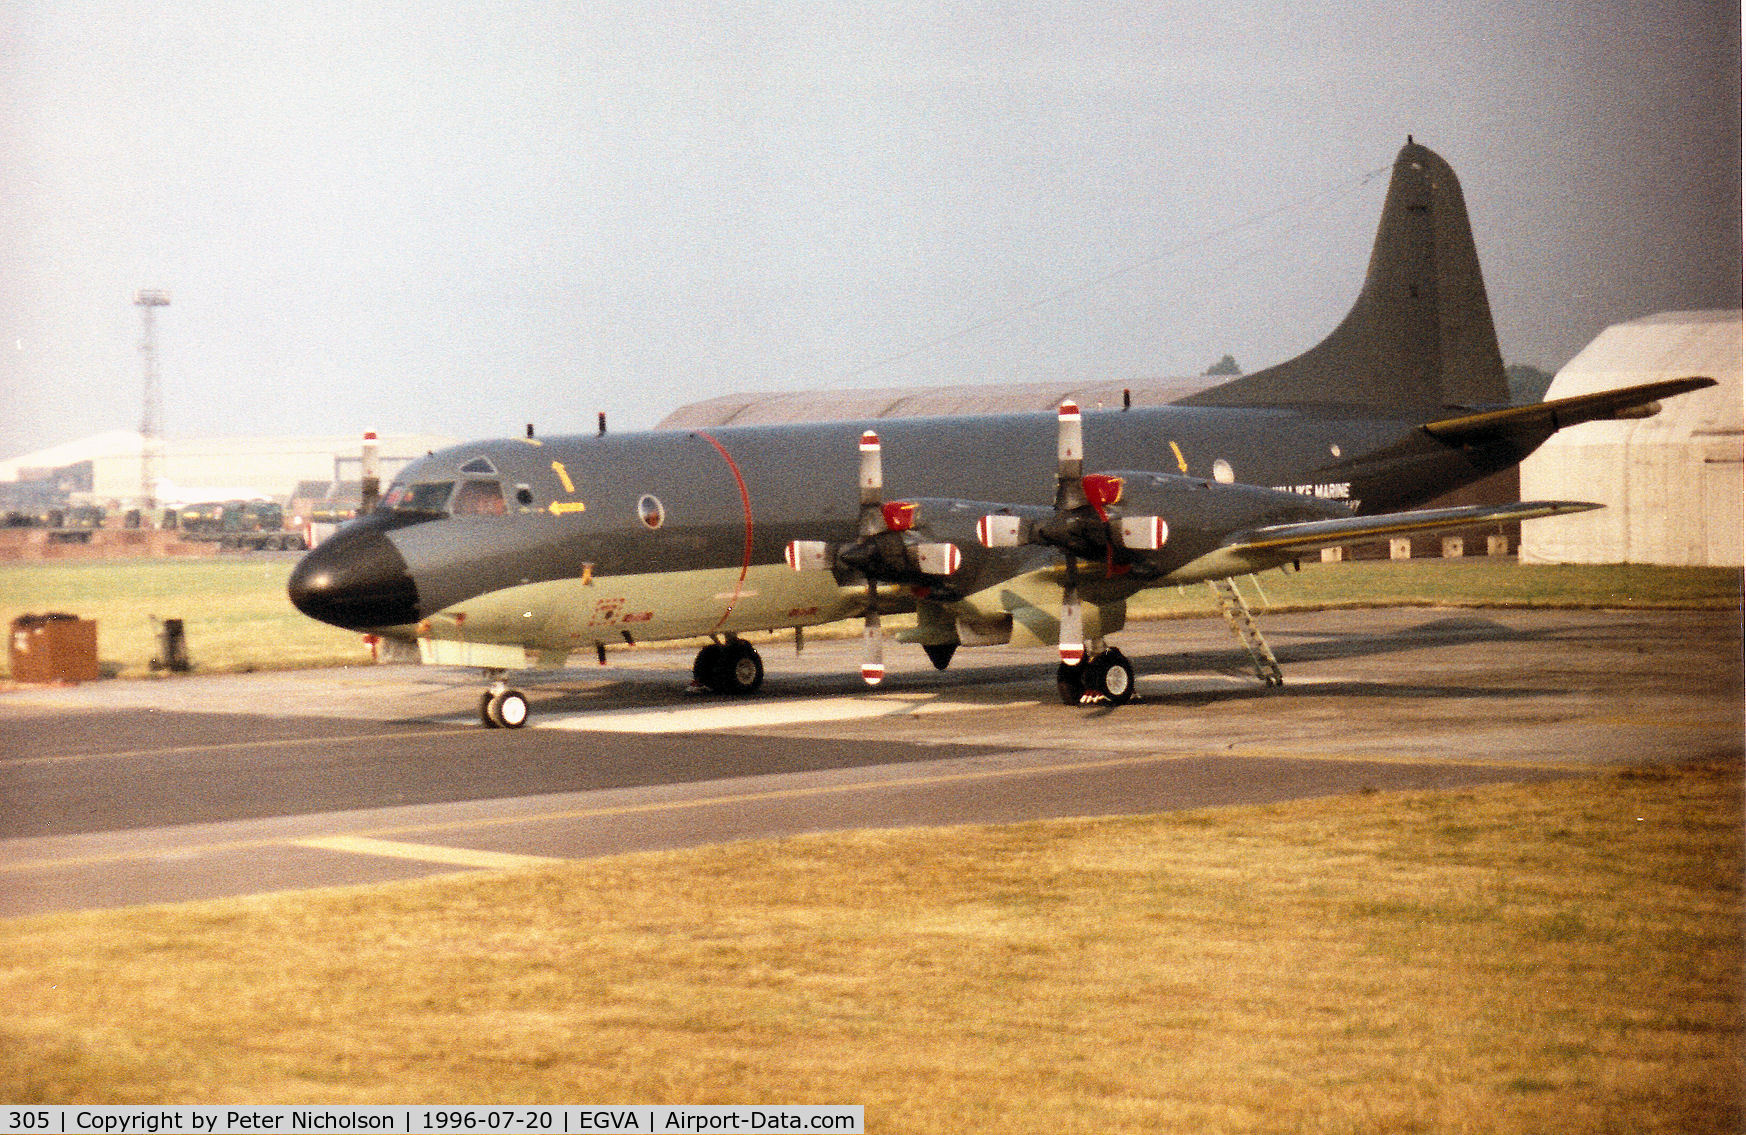 305, 1982 Lockheed P-3C Orion C/N 285A-5754, P-3C of the Royal Netherlands Navy on the flight-line at the 1996 Royal Intnl Air Tattoo at RAF Fairford.